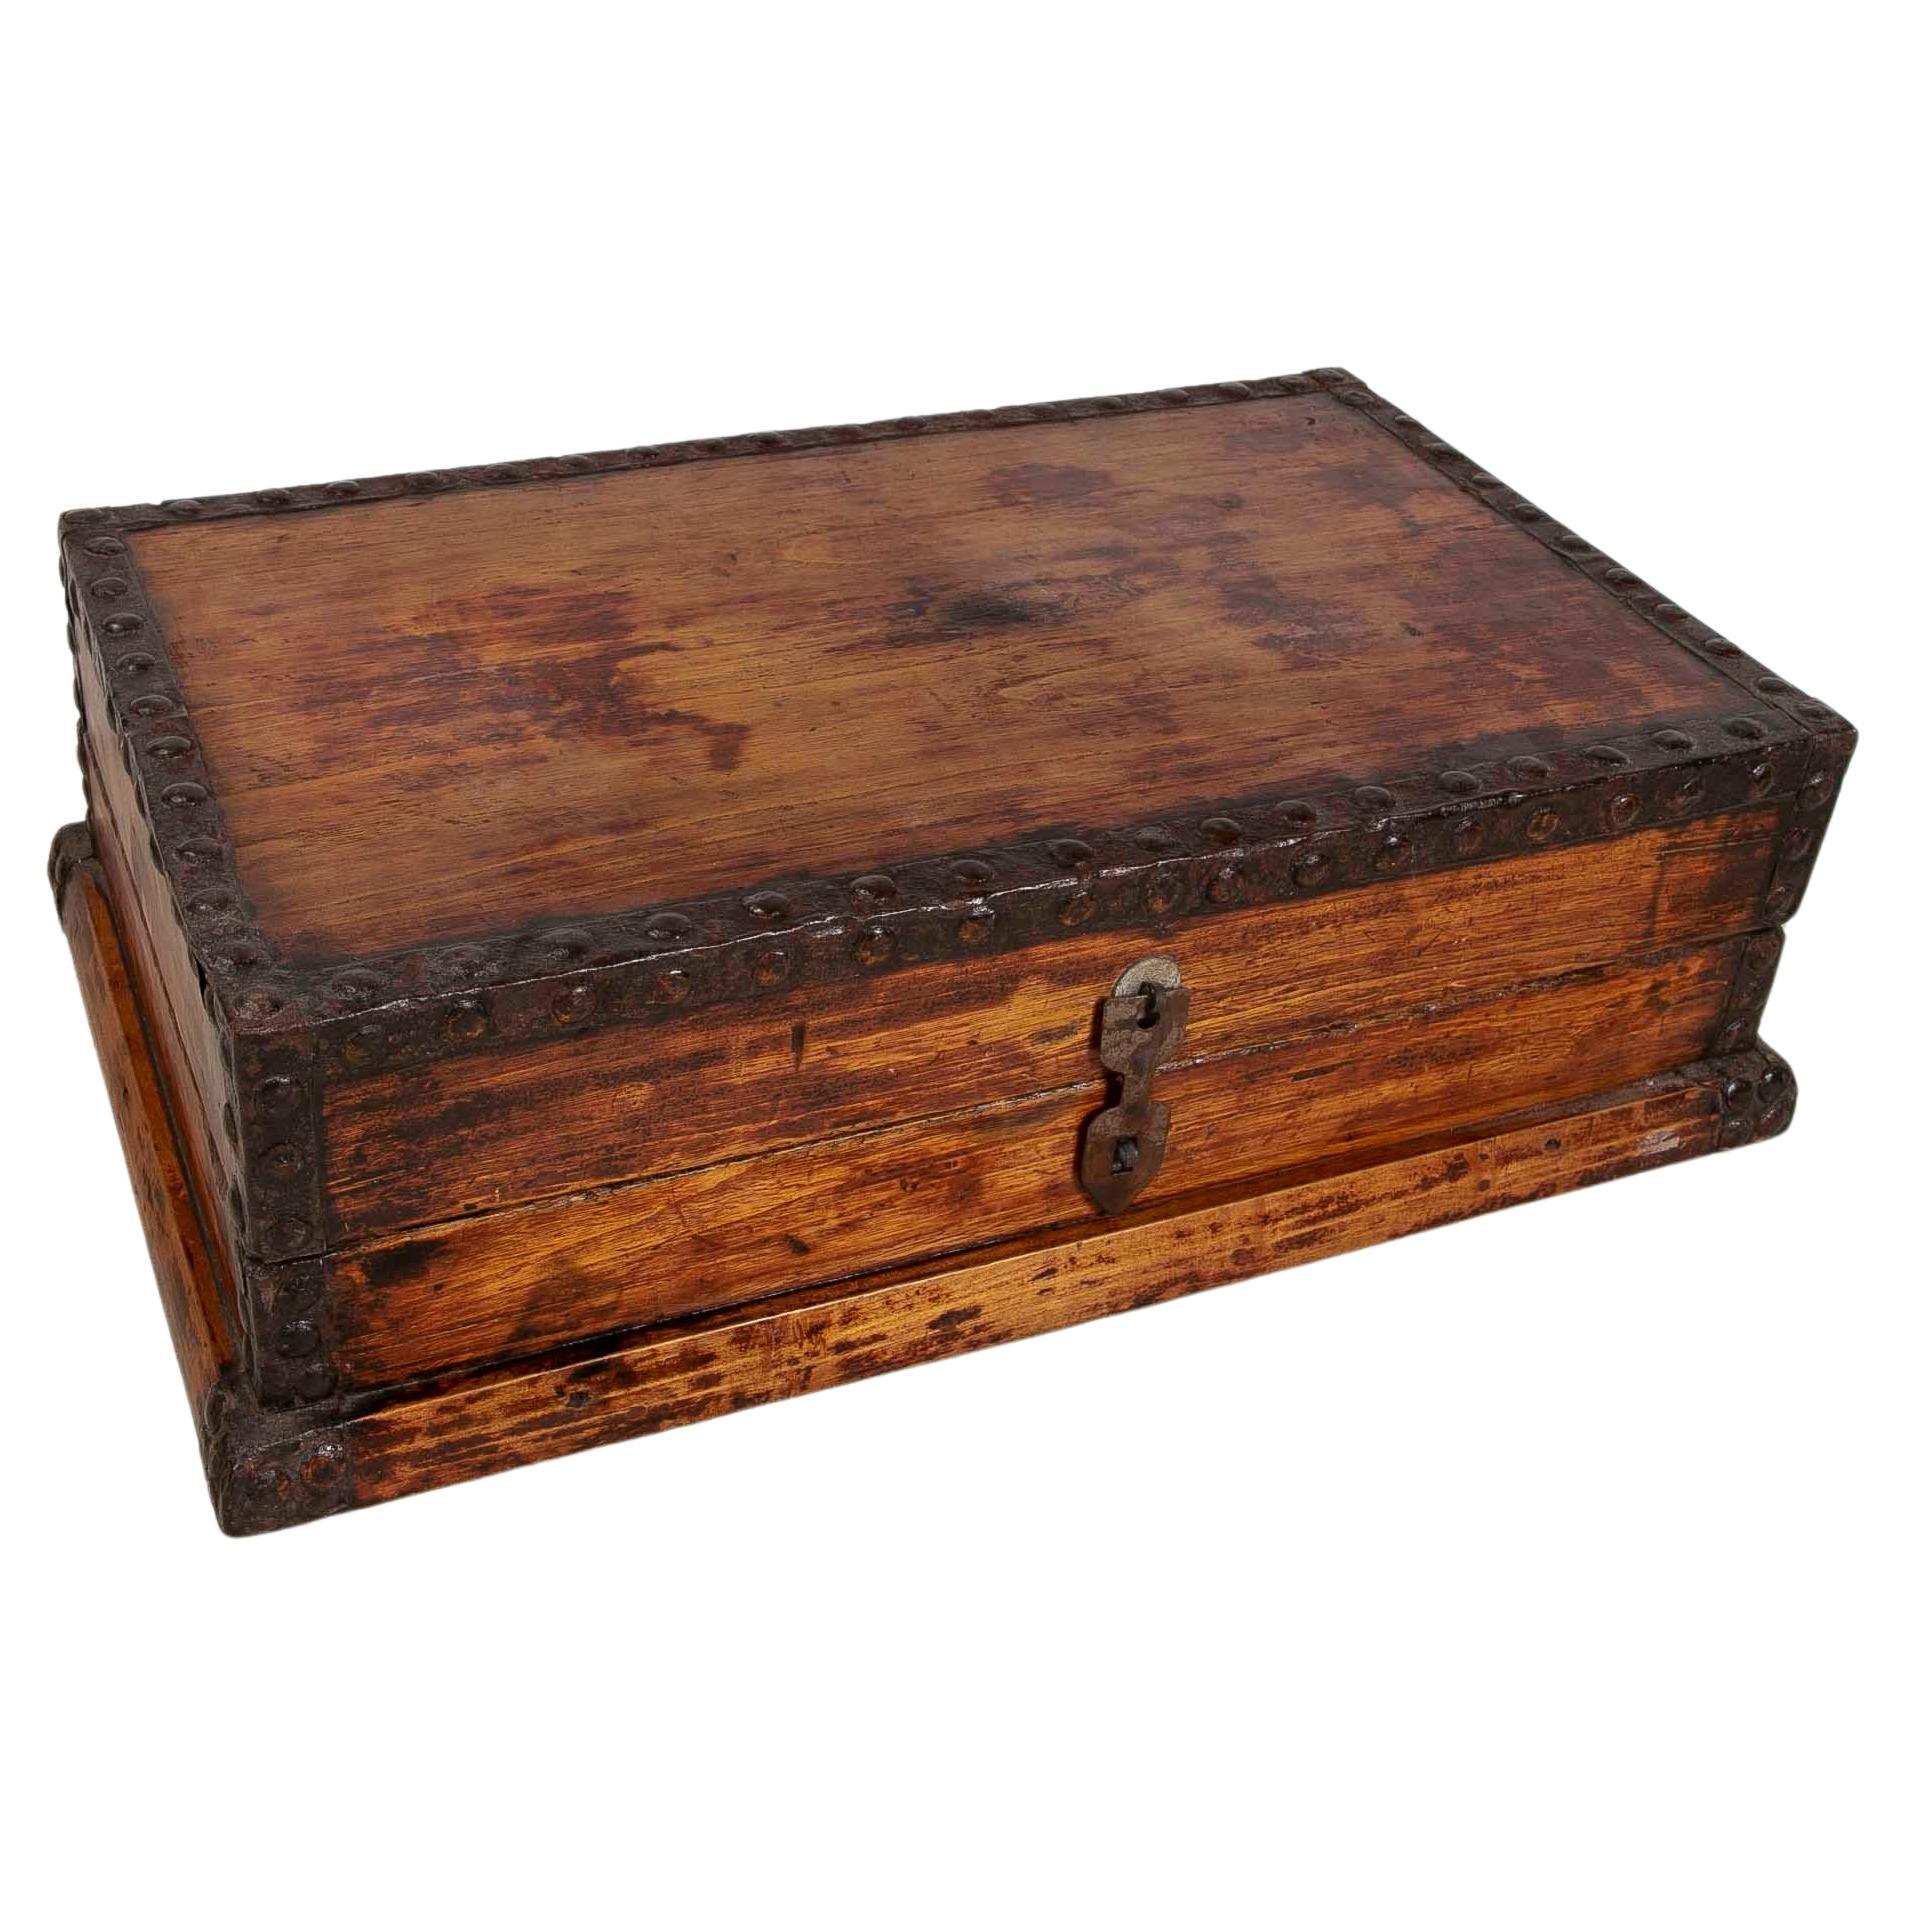 1930s Wooden Box with Iron Corners For Sale